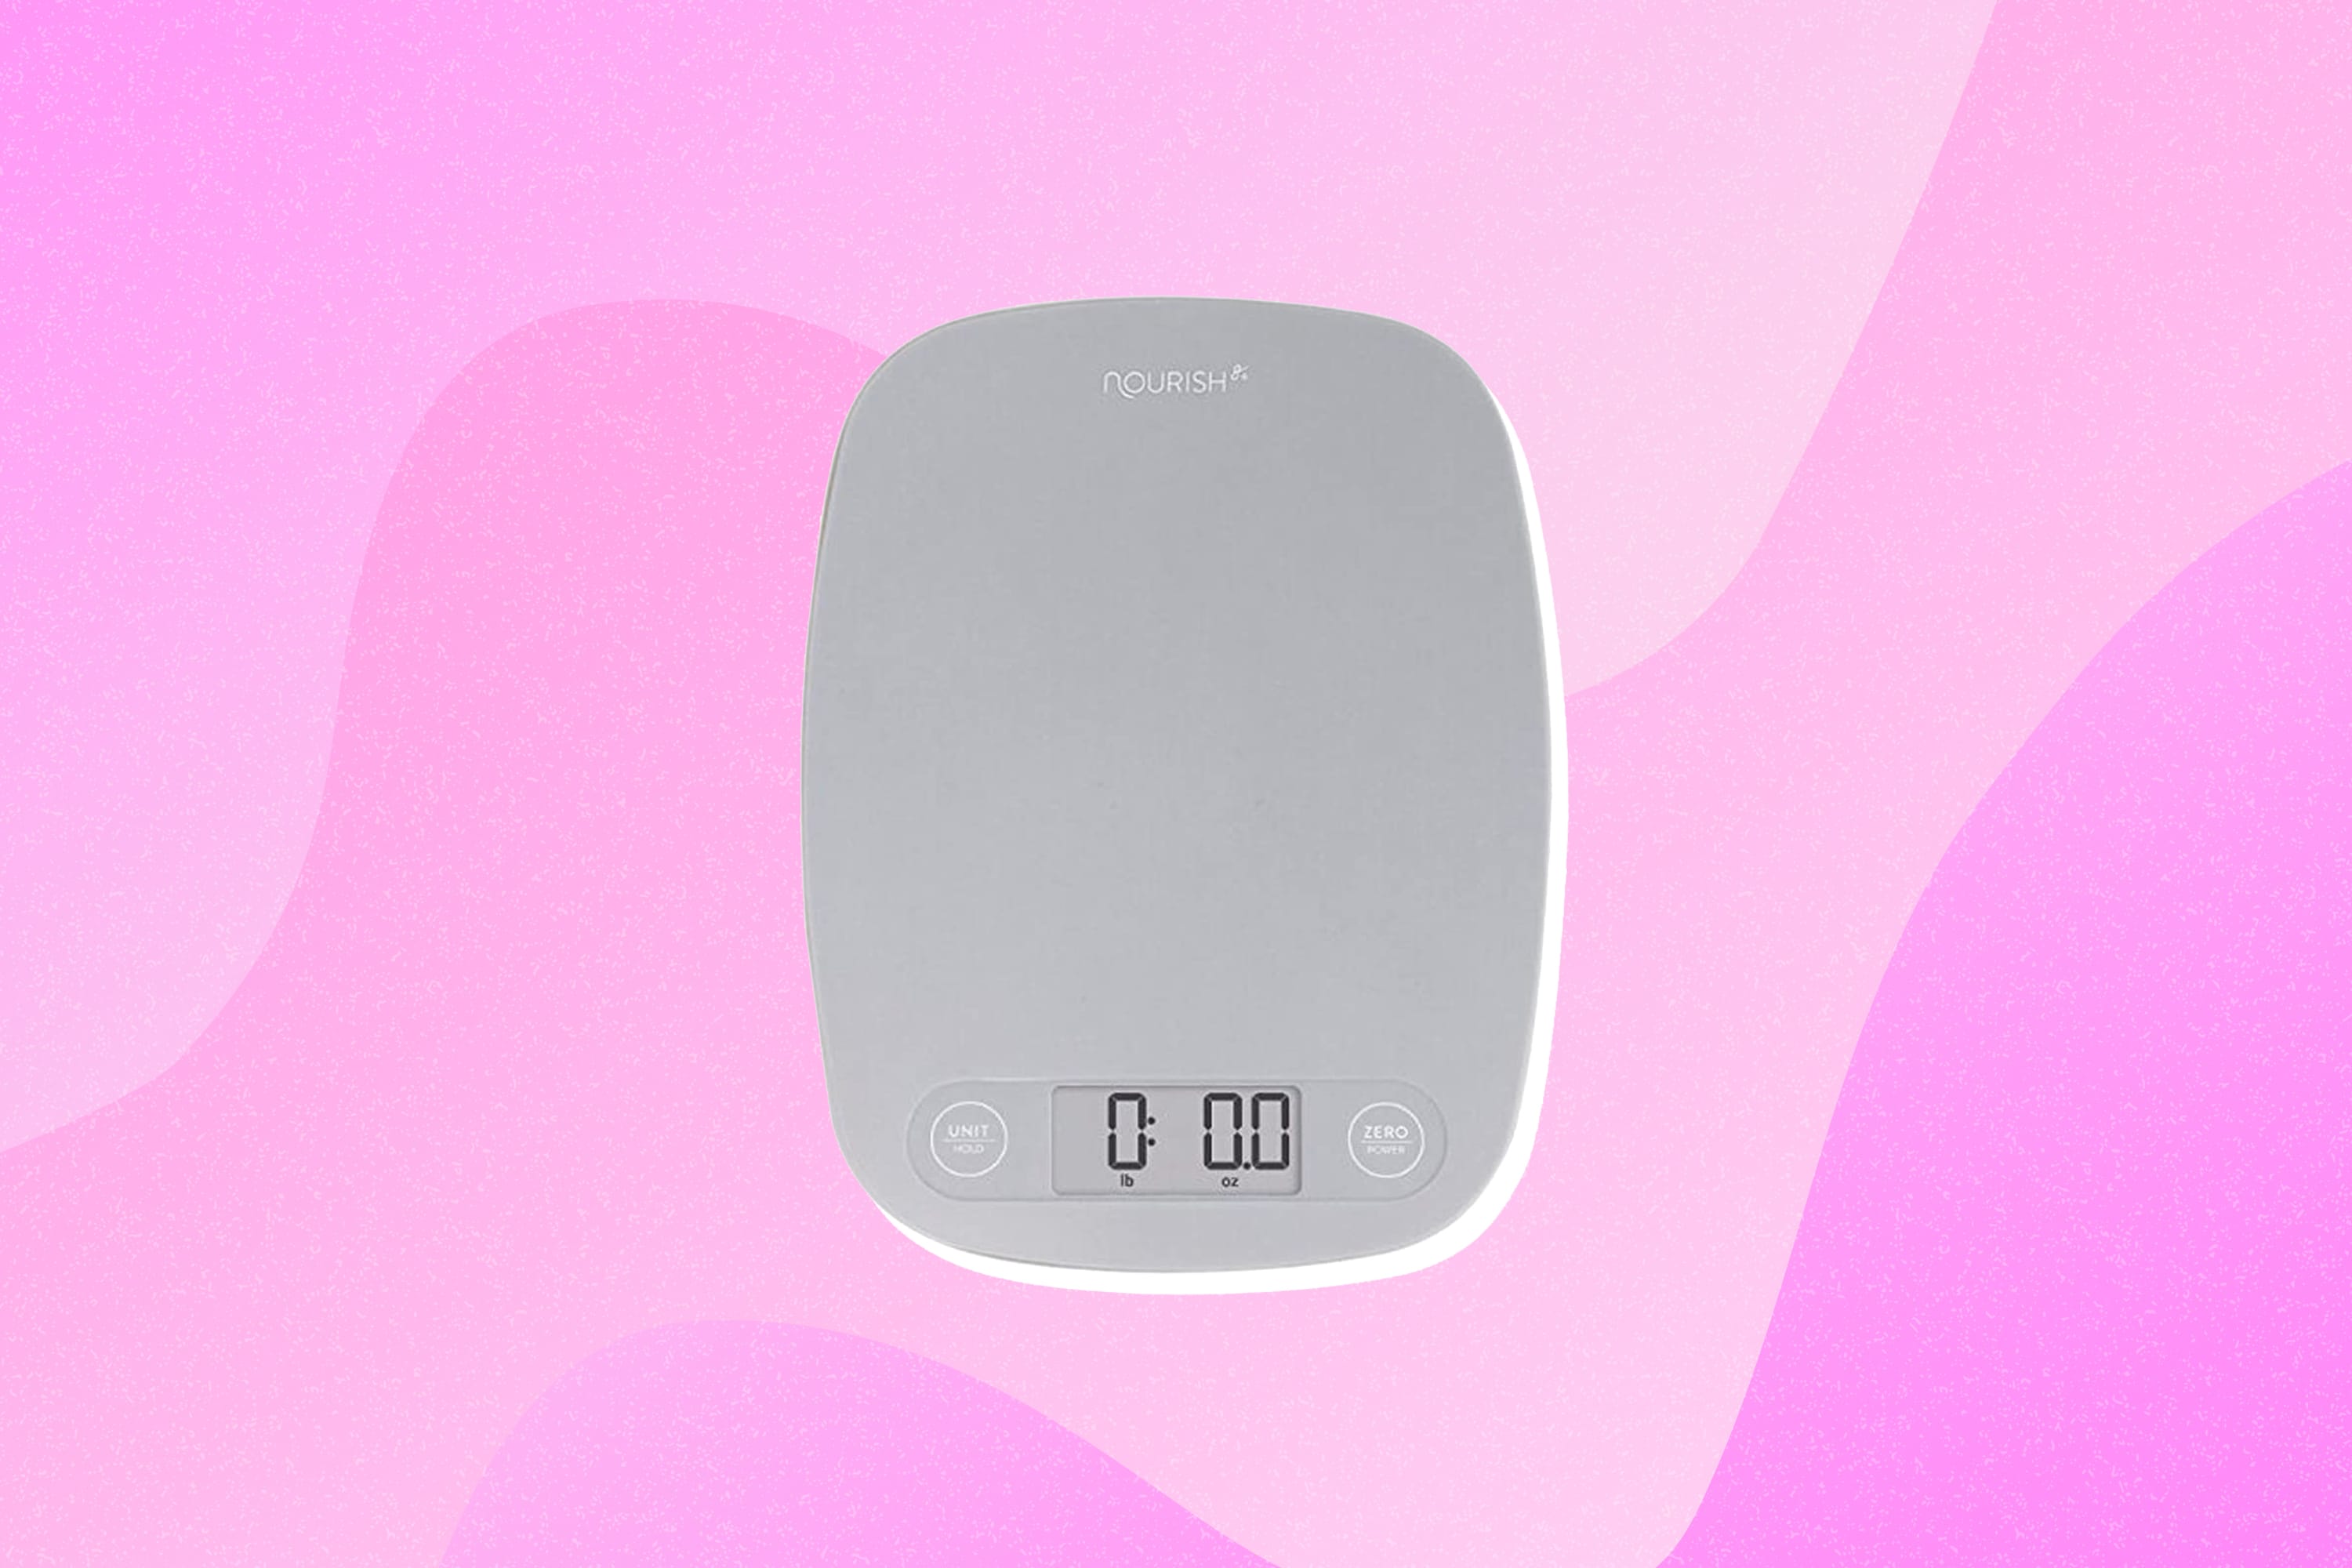 How to Use GreaterGoods Digital Food Kitchen Scale? 